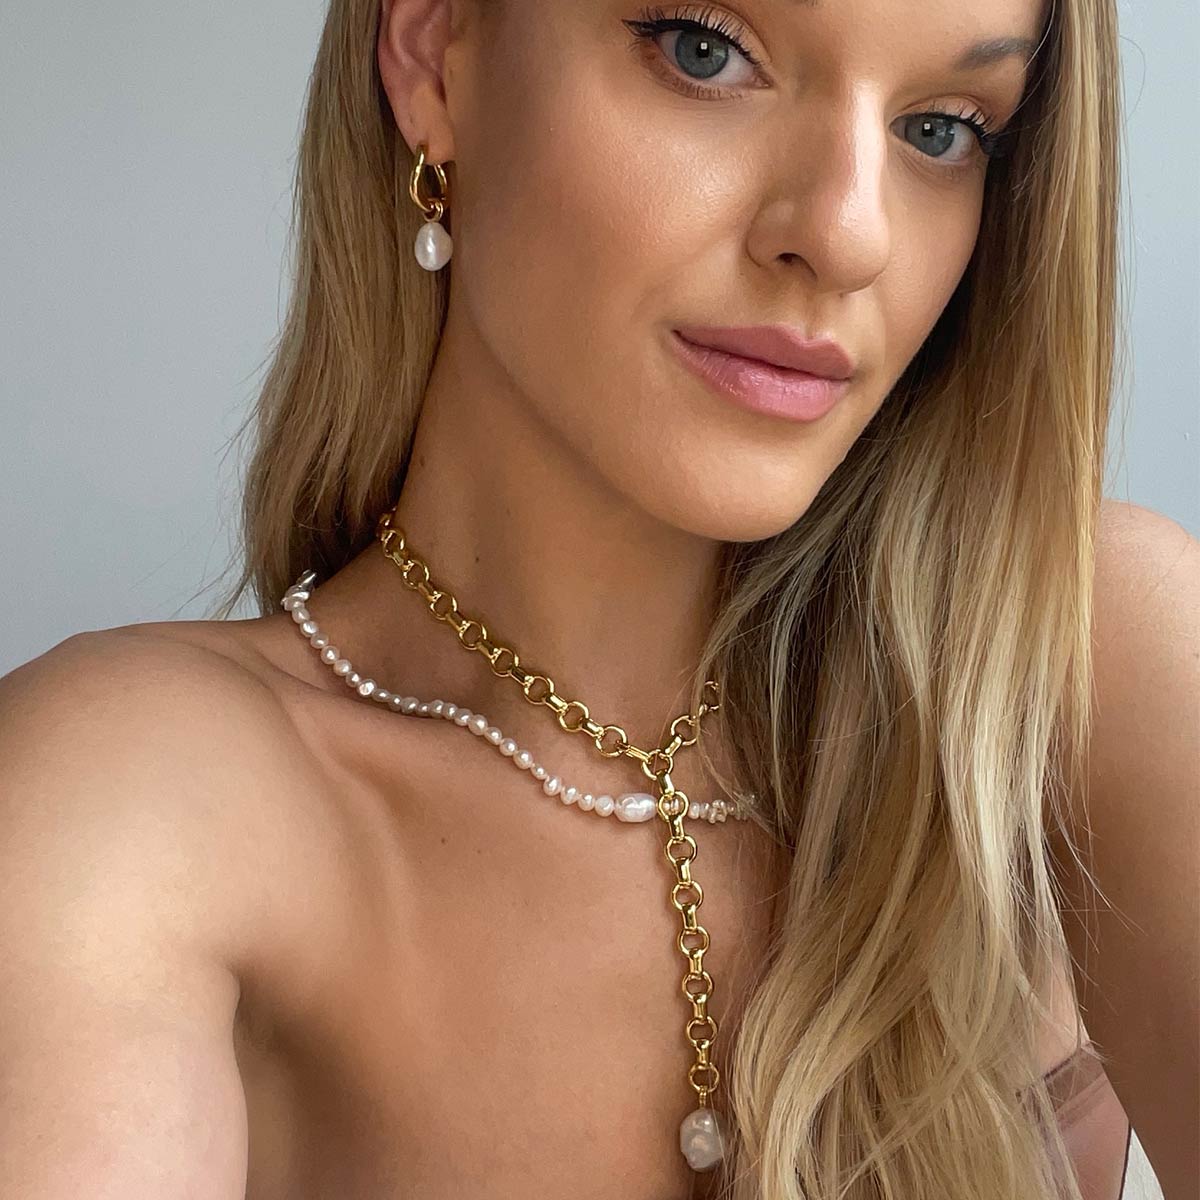 Serenity Pearl Link Chain Necklace in Gold worn by Katie Klinefelter